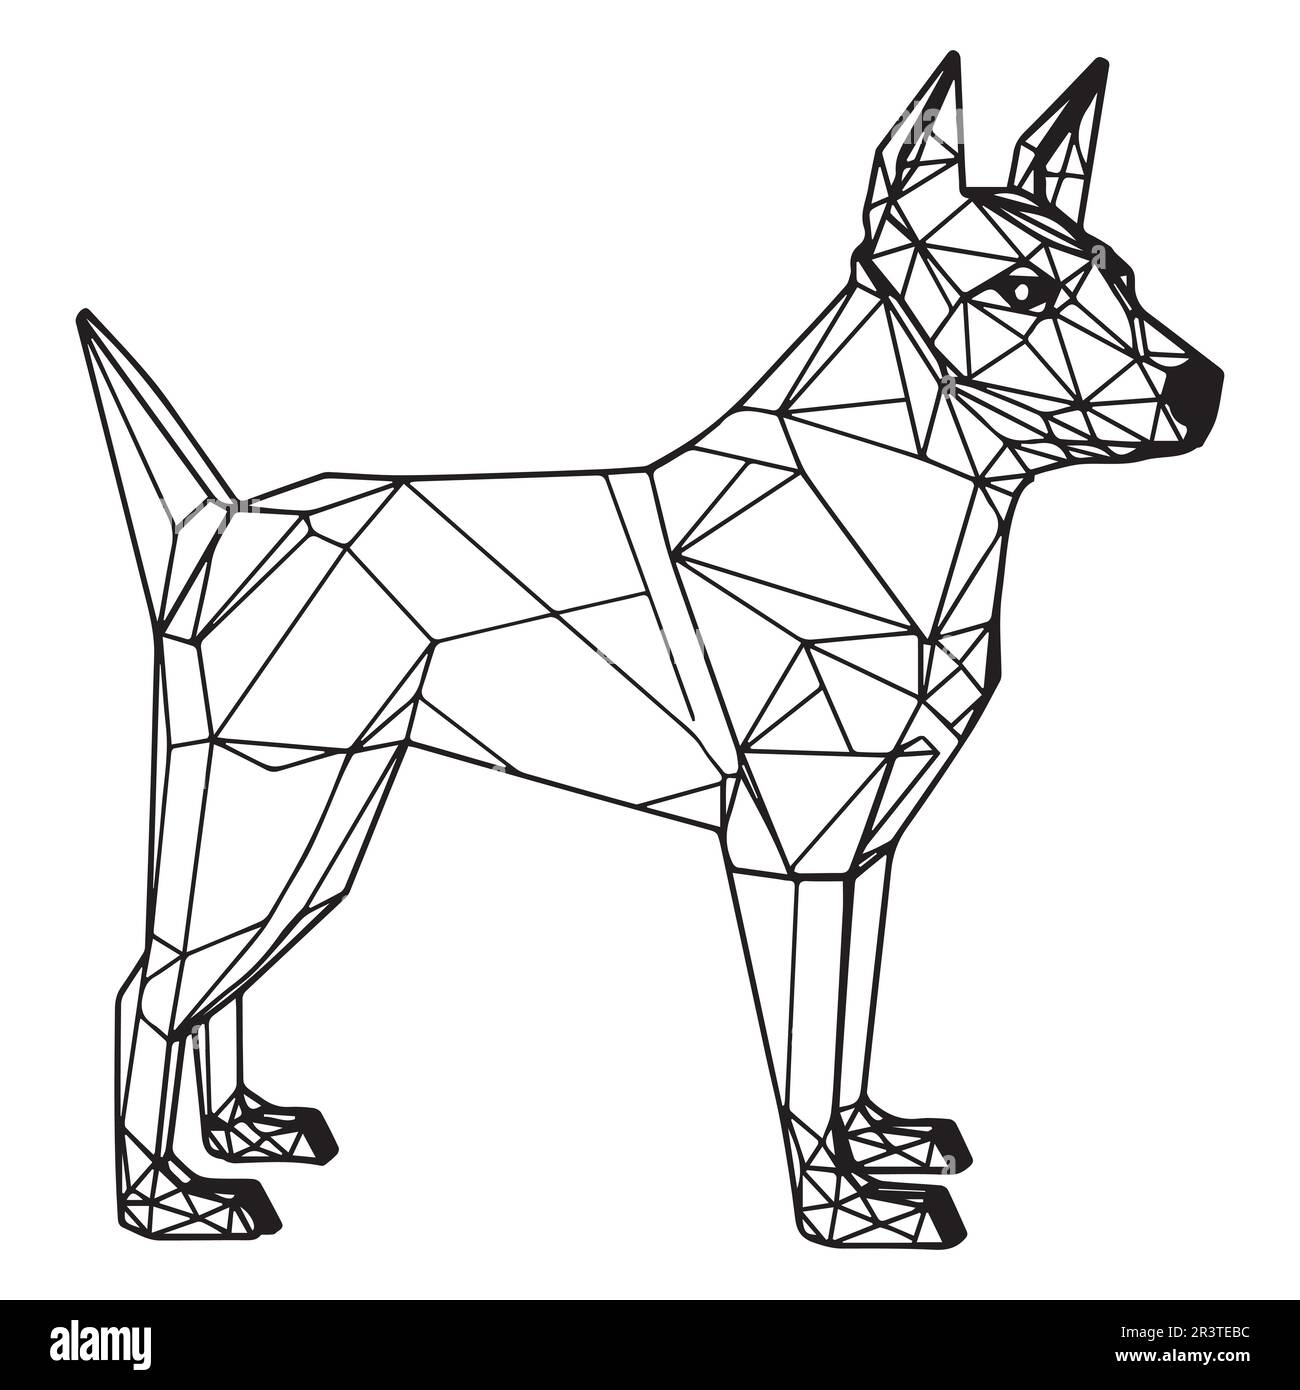 A black and white drawing of a dog with a triangle pattern vector illustration. Stock Vector